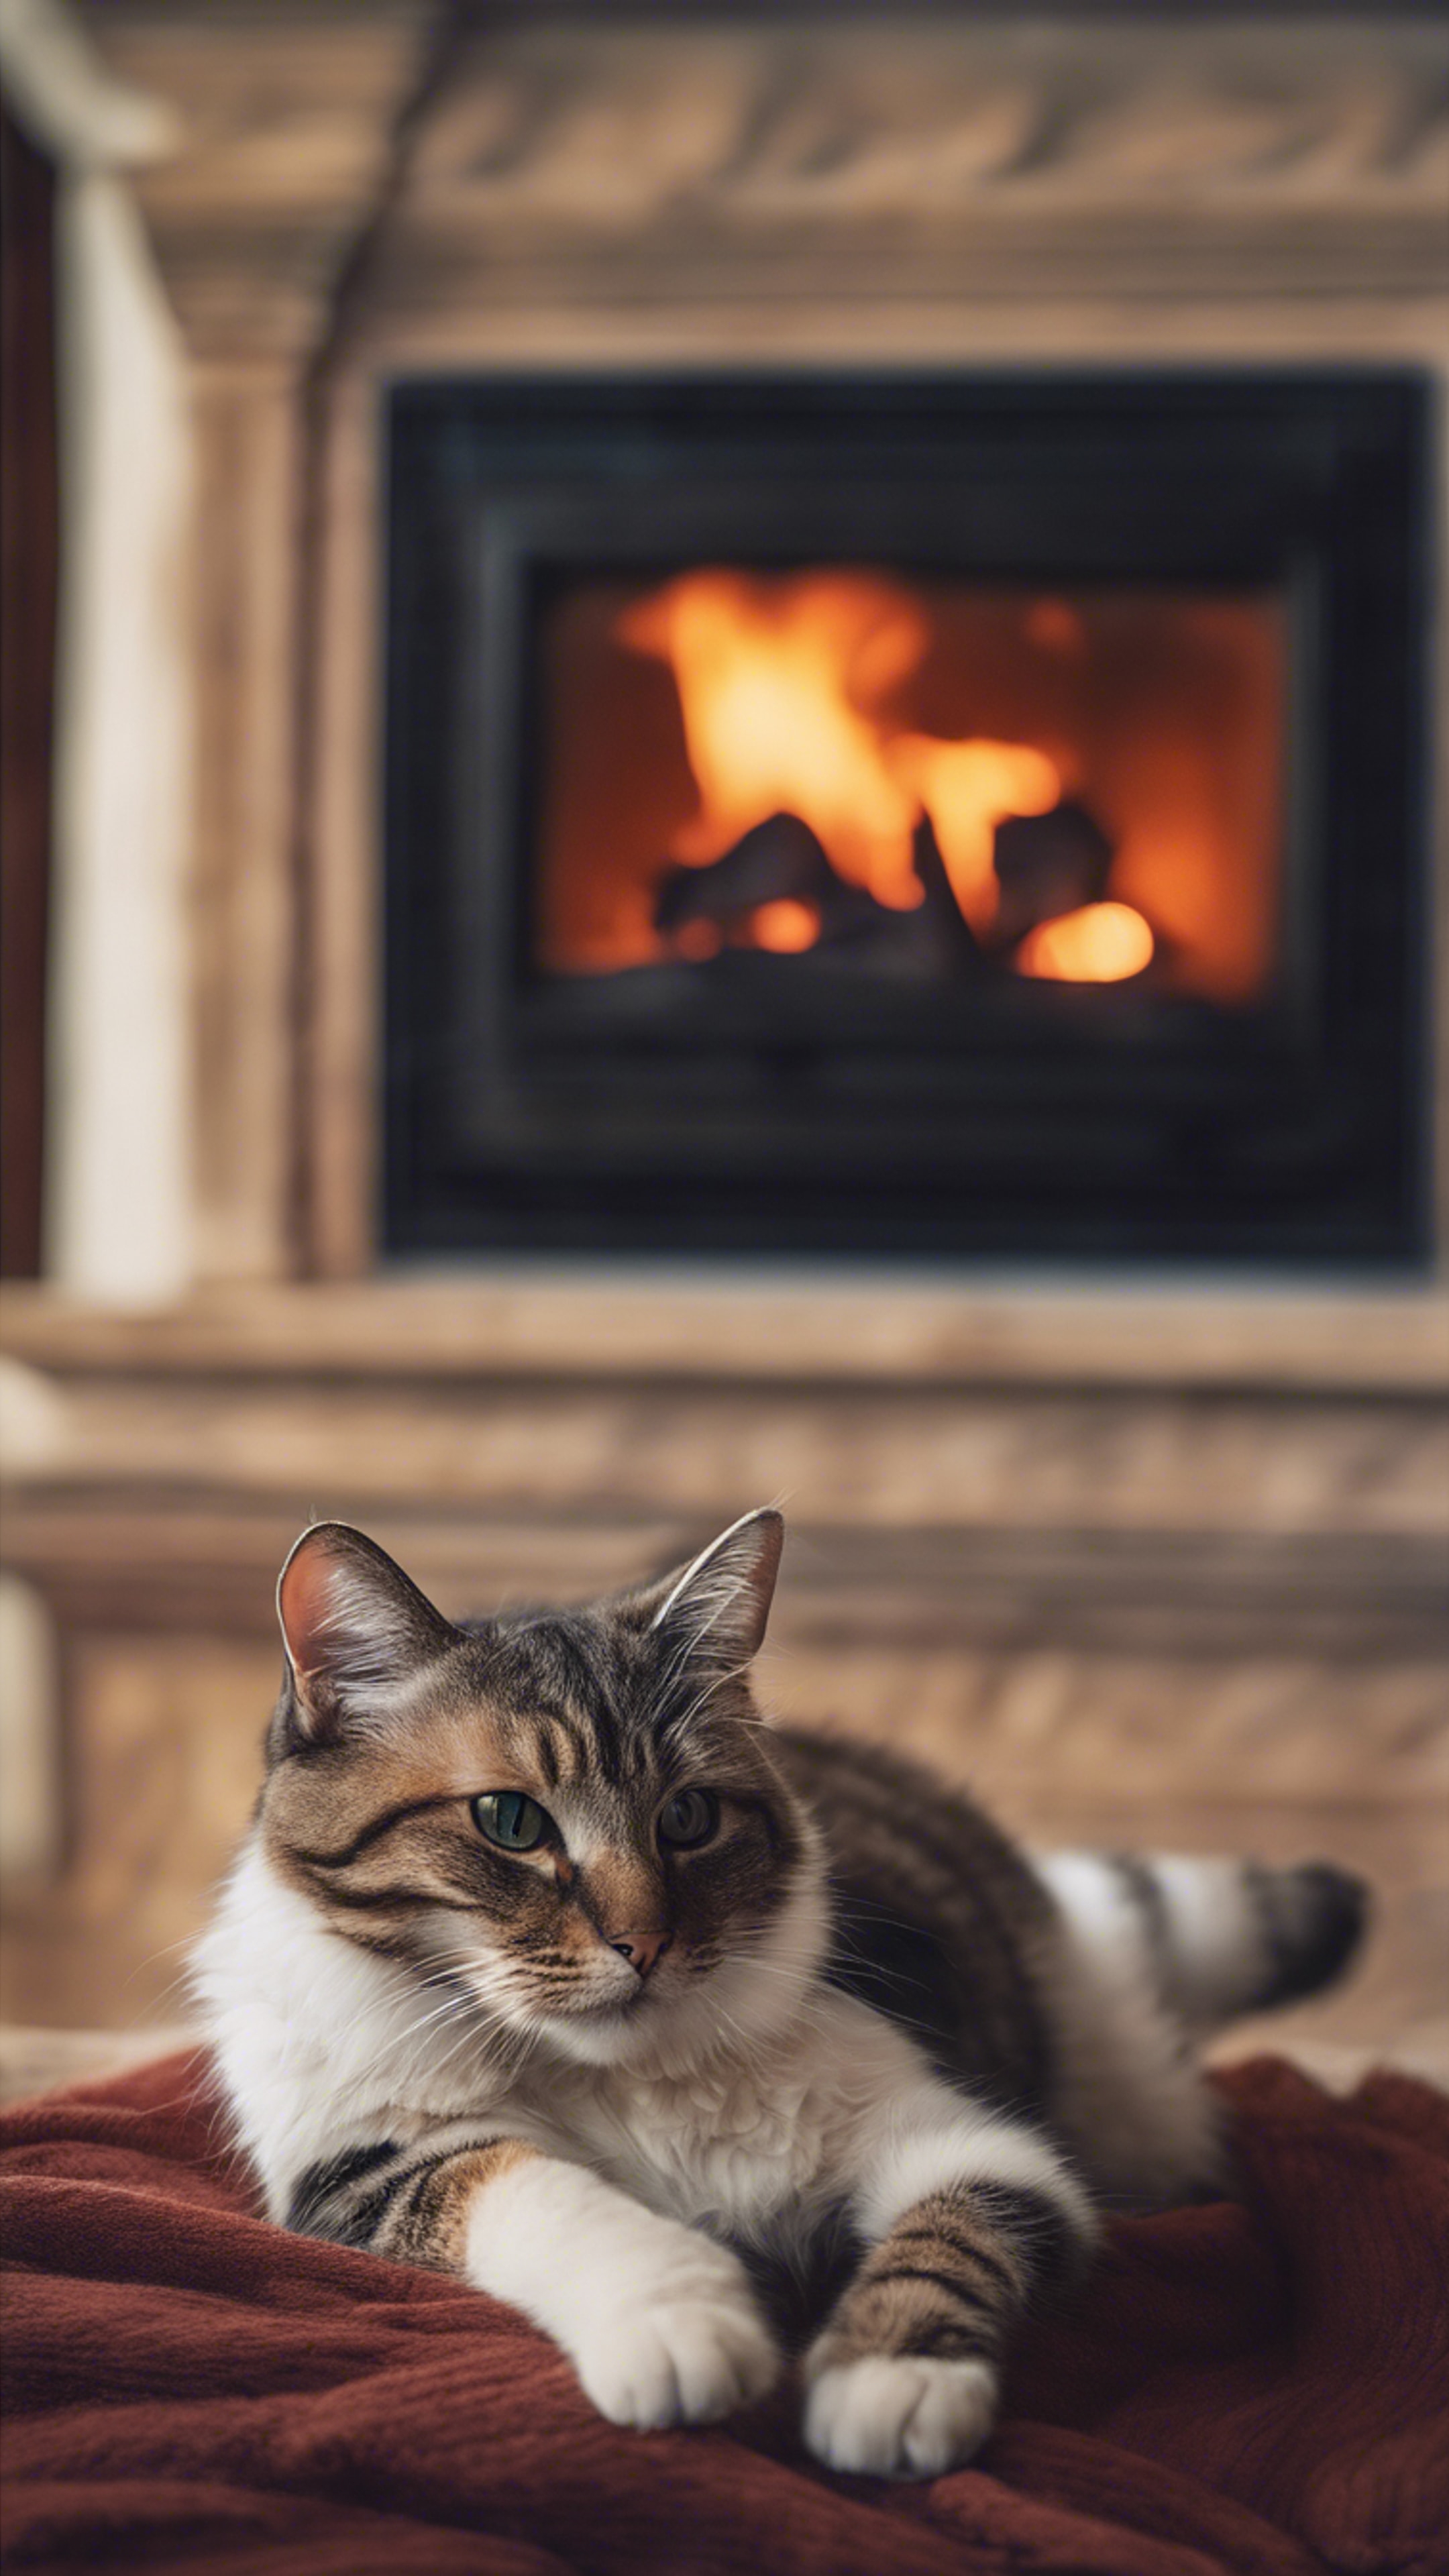 A cat lounging in front of a roaring fireplace, completely mesmerized by the flickering flames.壁紙[f30d5ca7e04c497dade0]